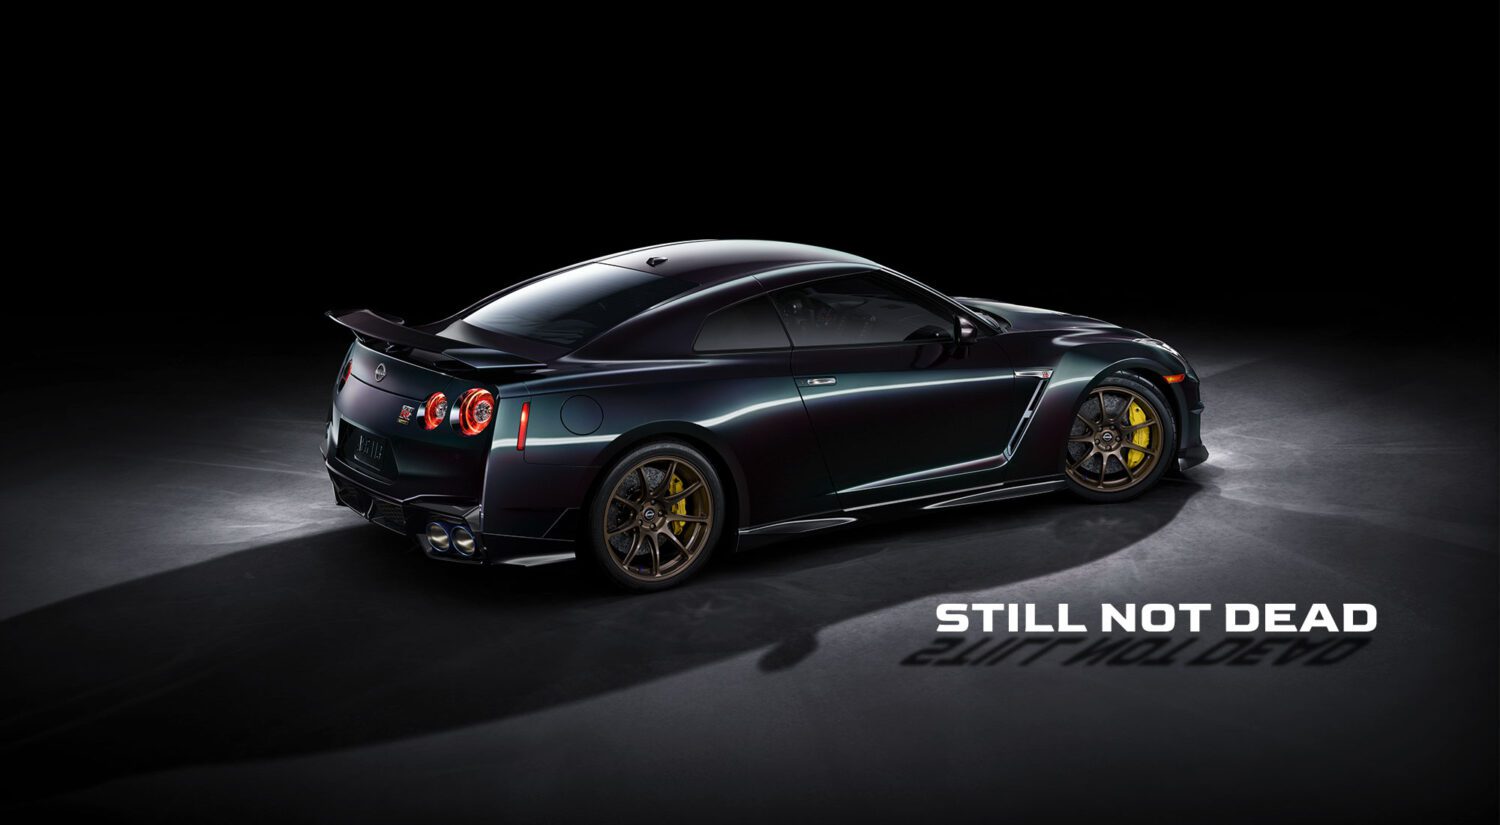 Is the Nissan GT-R still relevant?